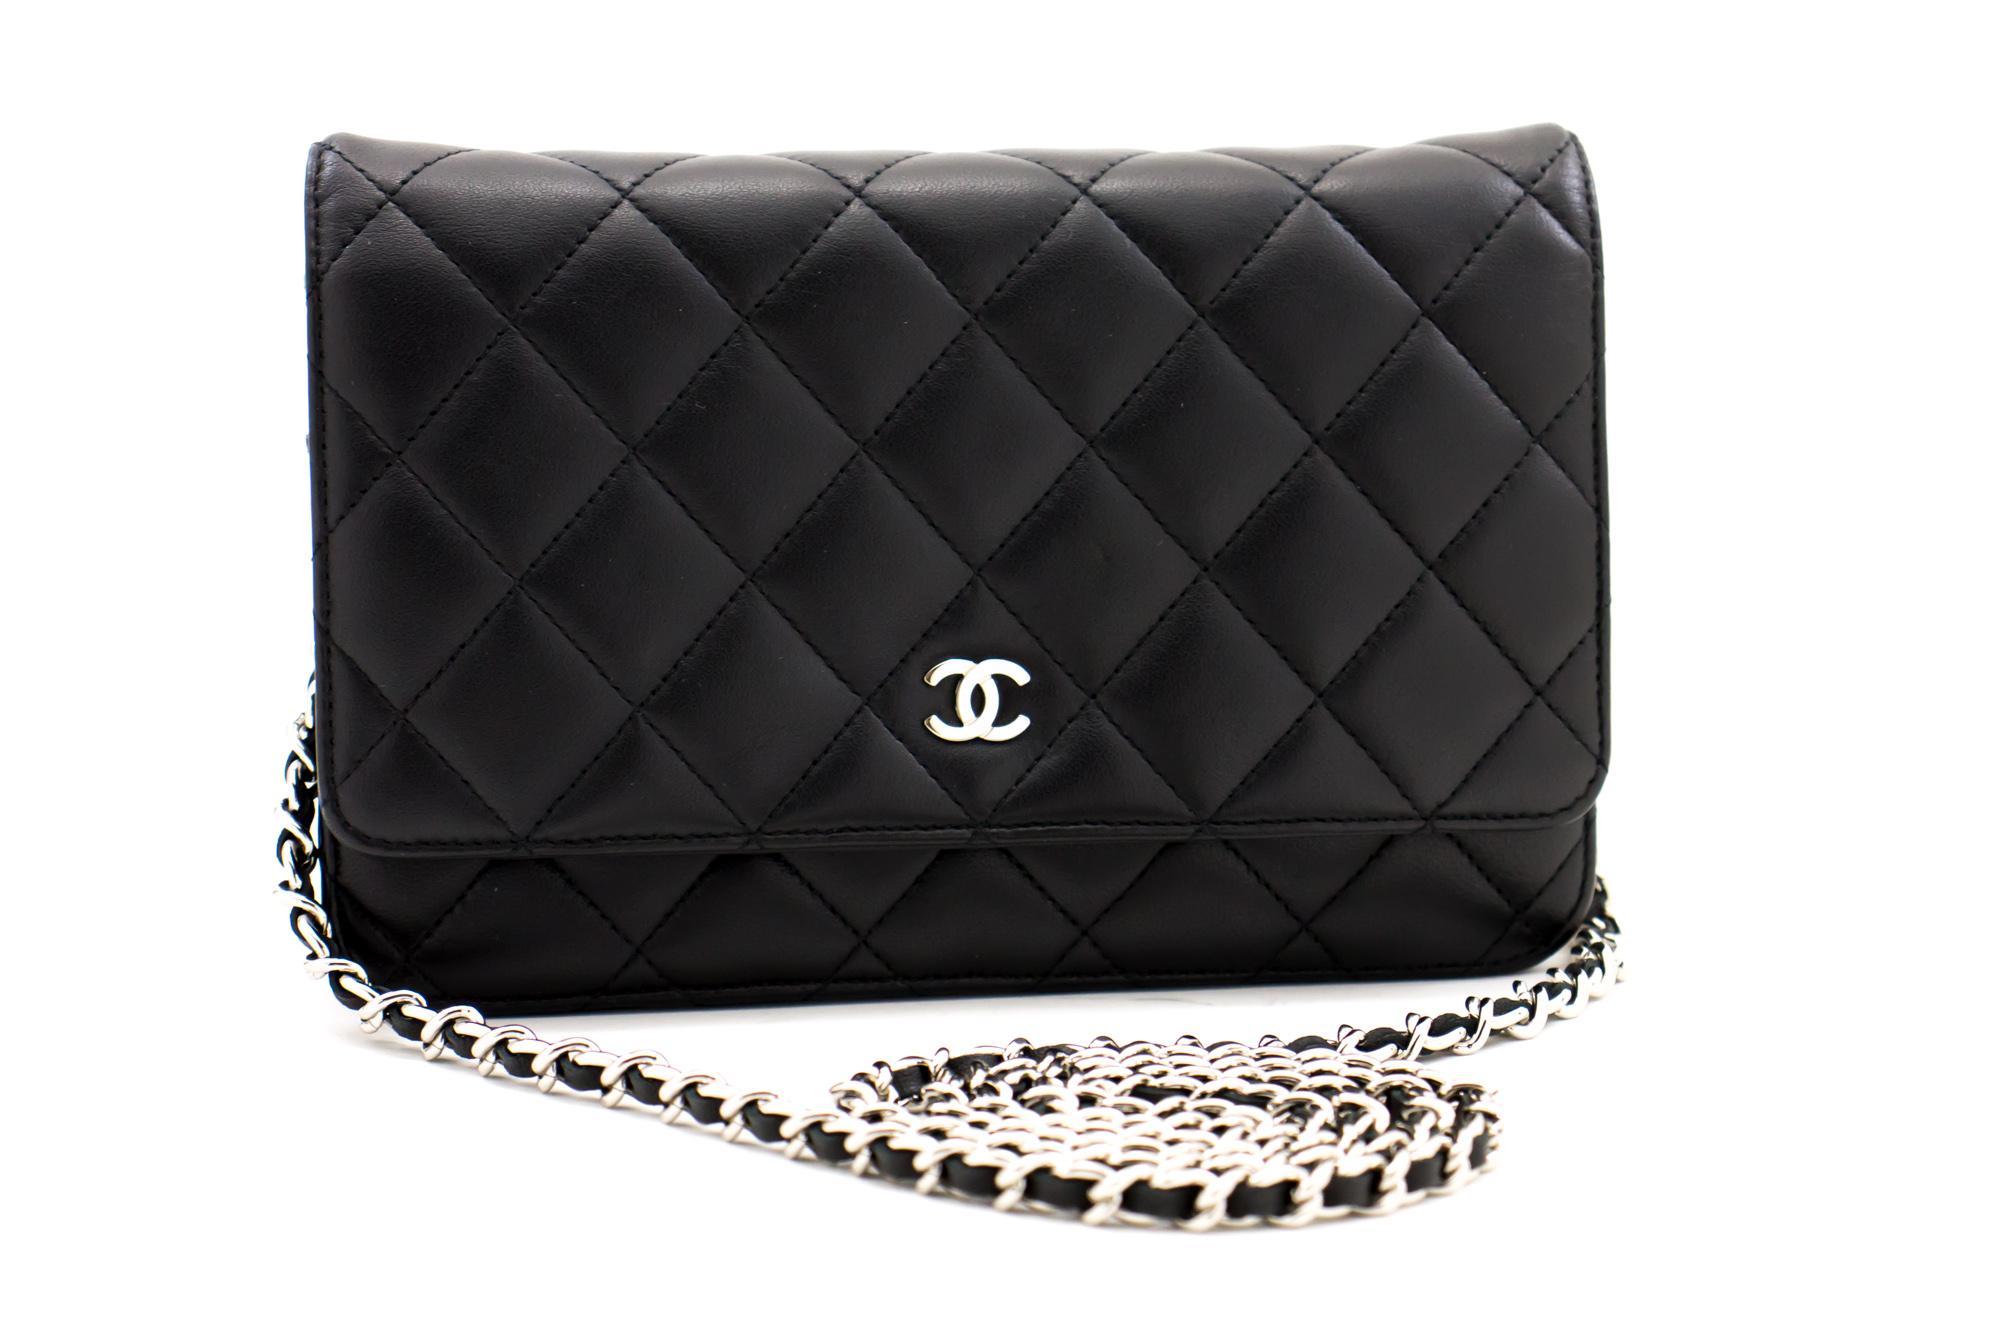 An authentic CHANEL Black Classic Wallet On Chain WOC Shoulder Bag Crossbody. The color is Black. The outside material is Leather. The pattern is Solid. This item is Contemporary. The year of manufacture would be 2012.
Conditions & Ratings
Outside